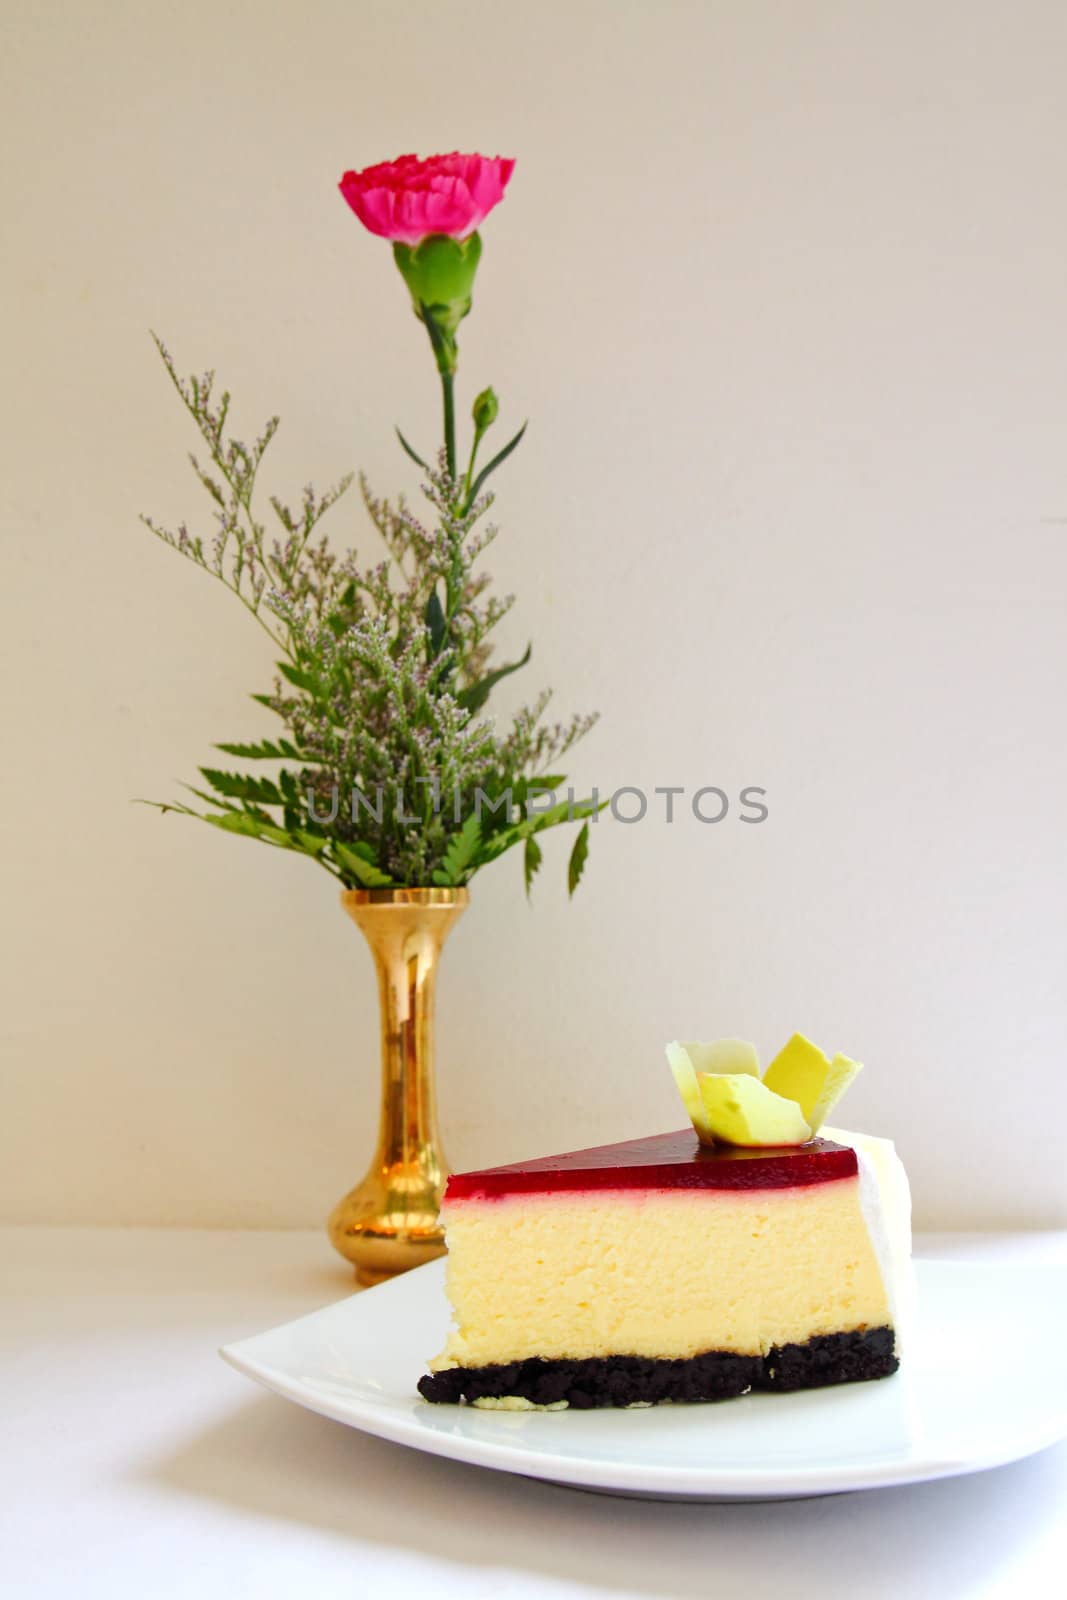 sweet cake with strawberry on a plate with flower by nuchylee